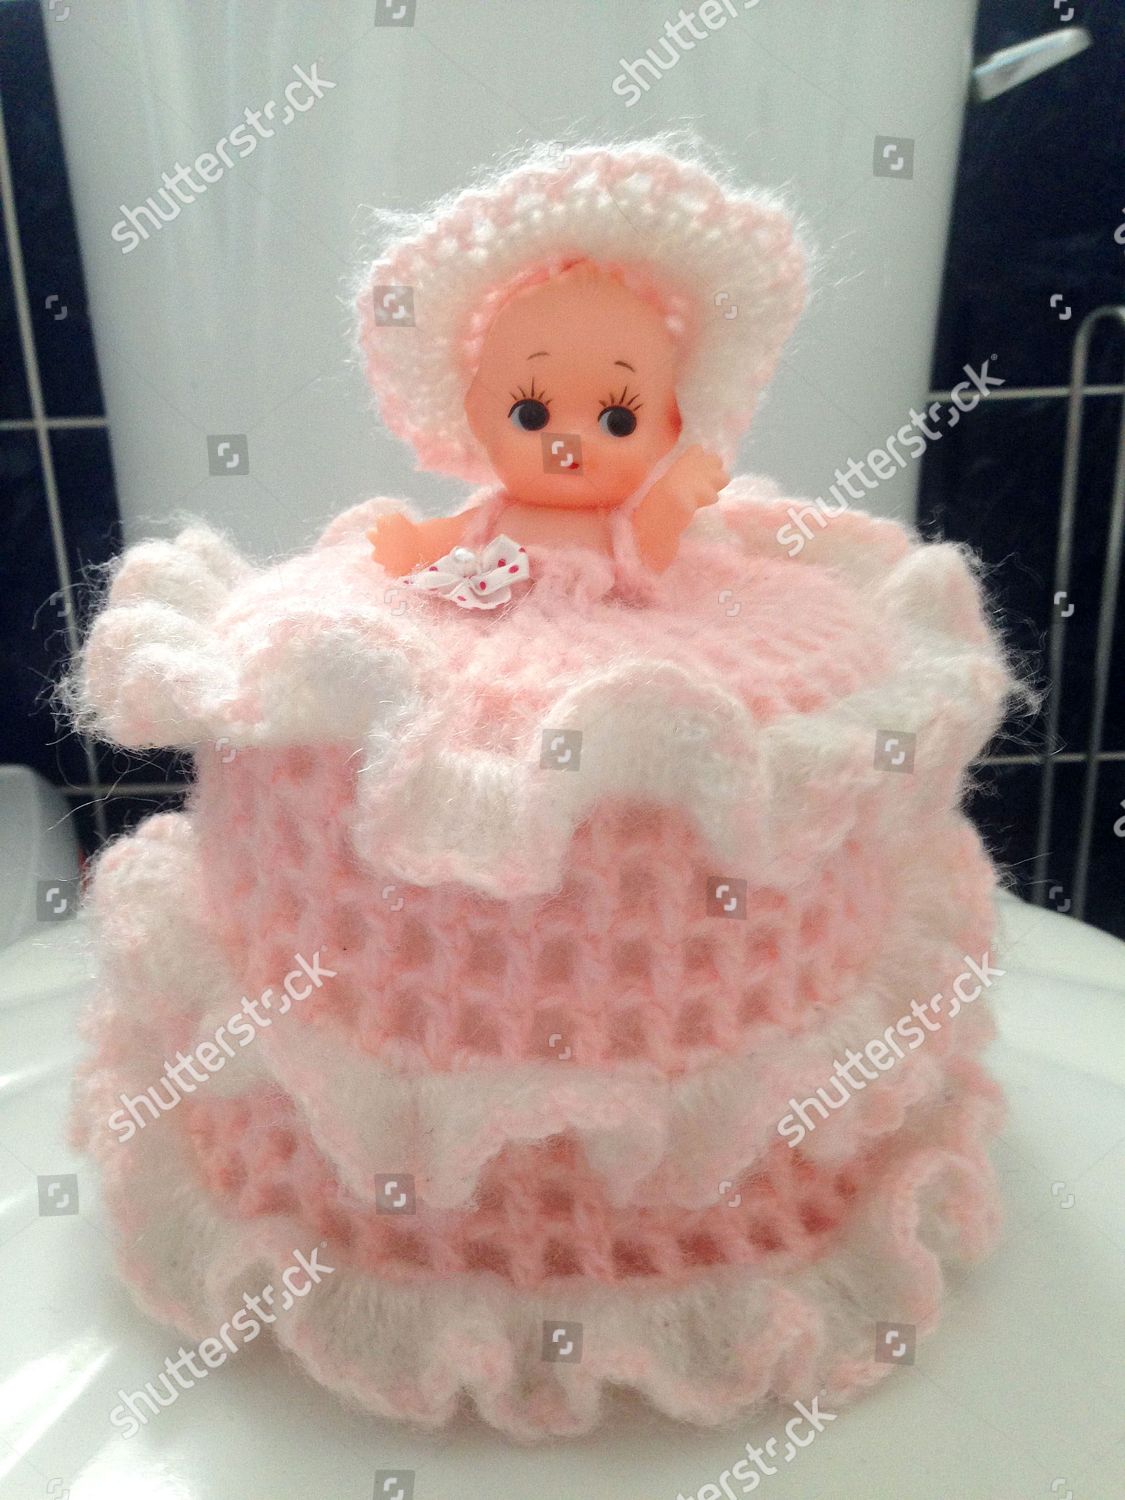 knitted doll toilet roll holder